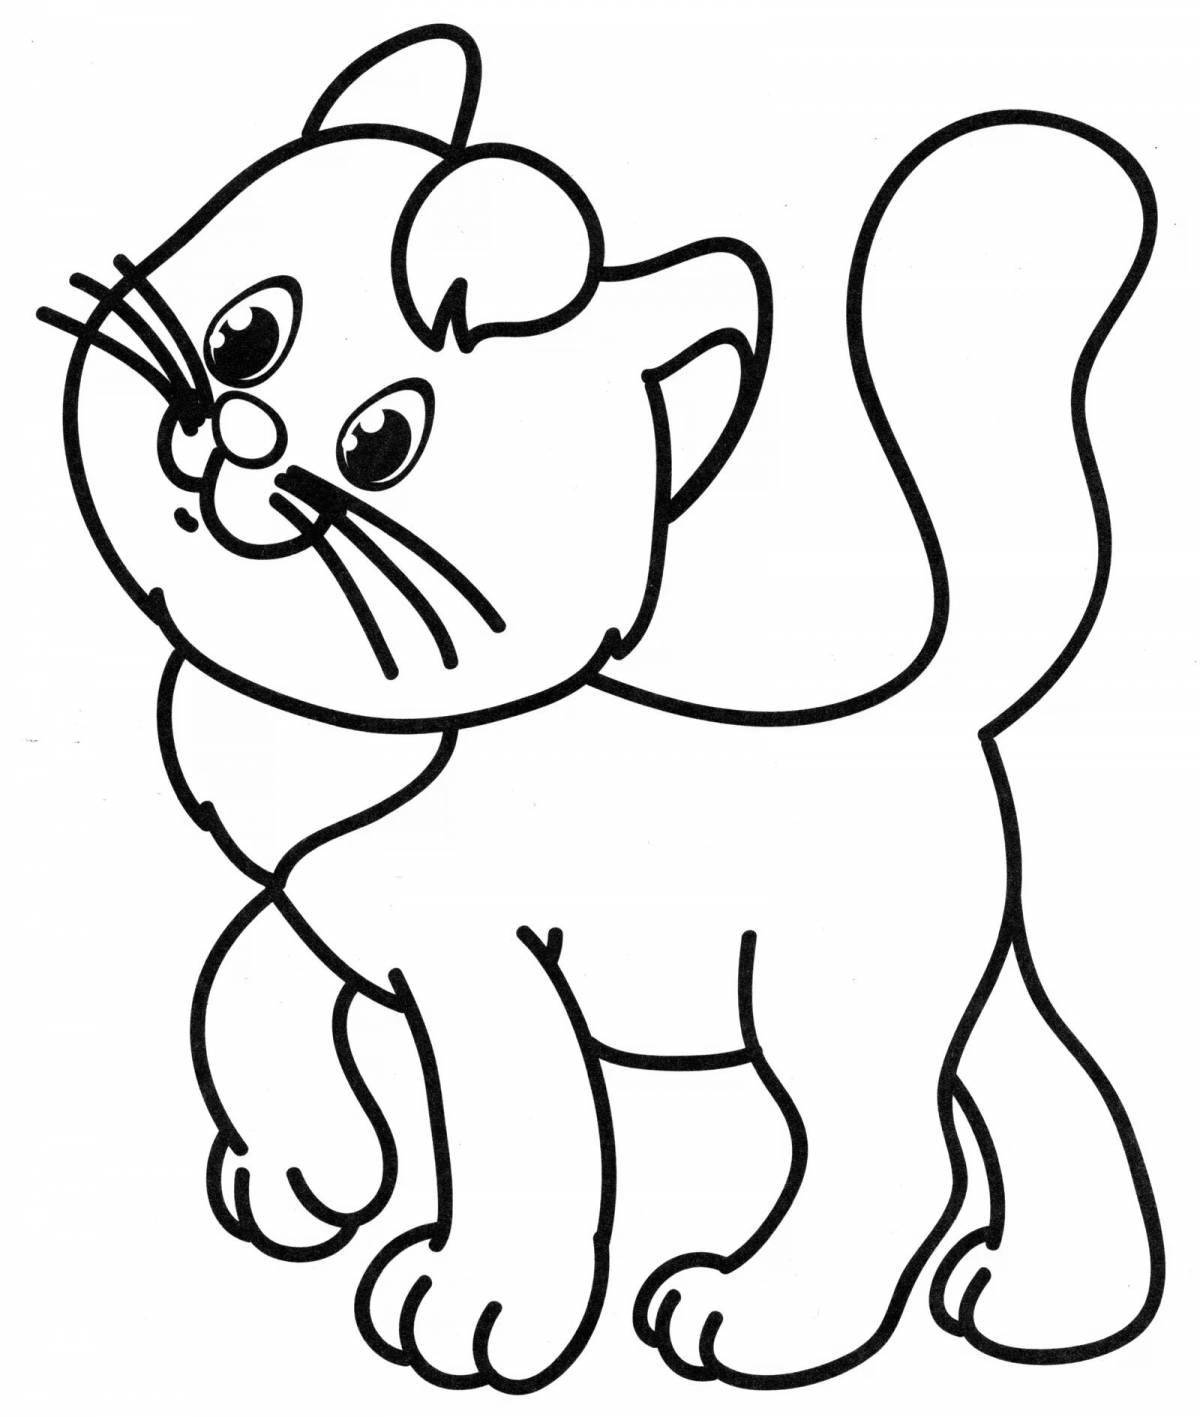 Adorable cat coloring pages for preschoolers